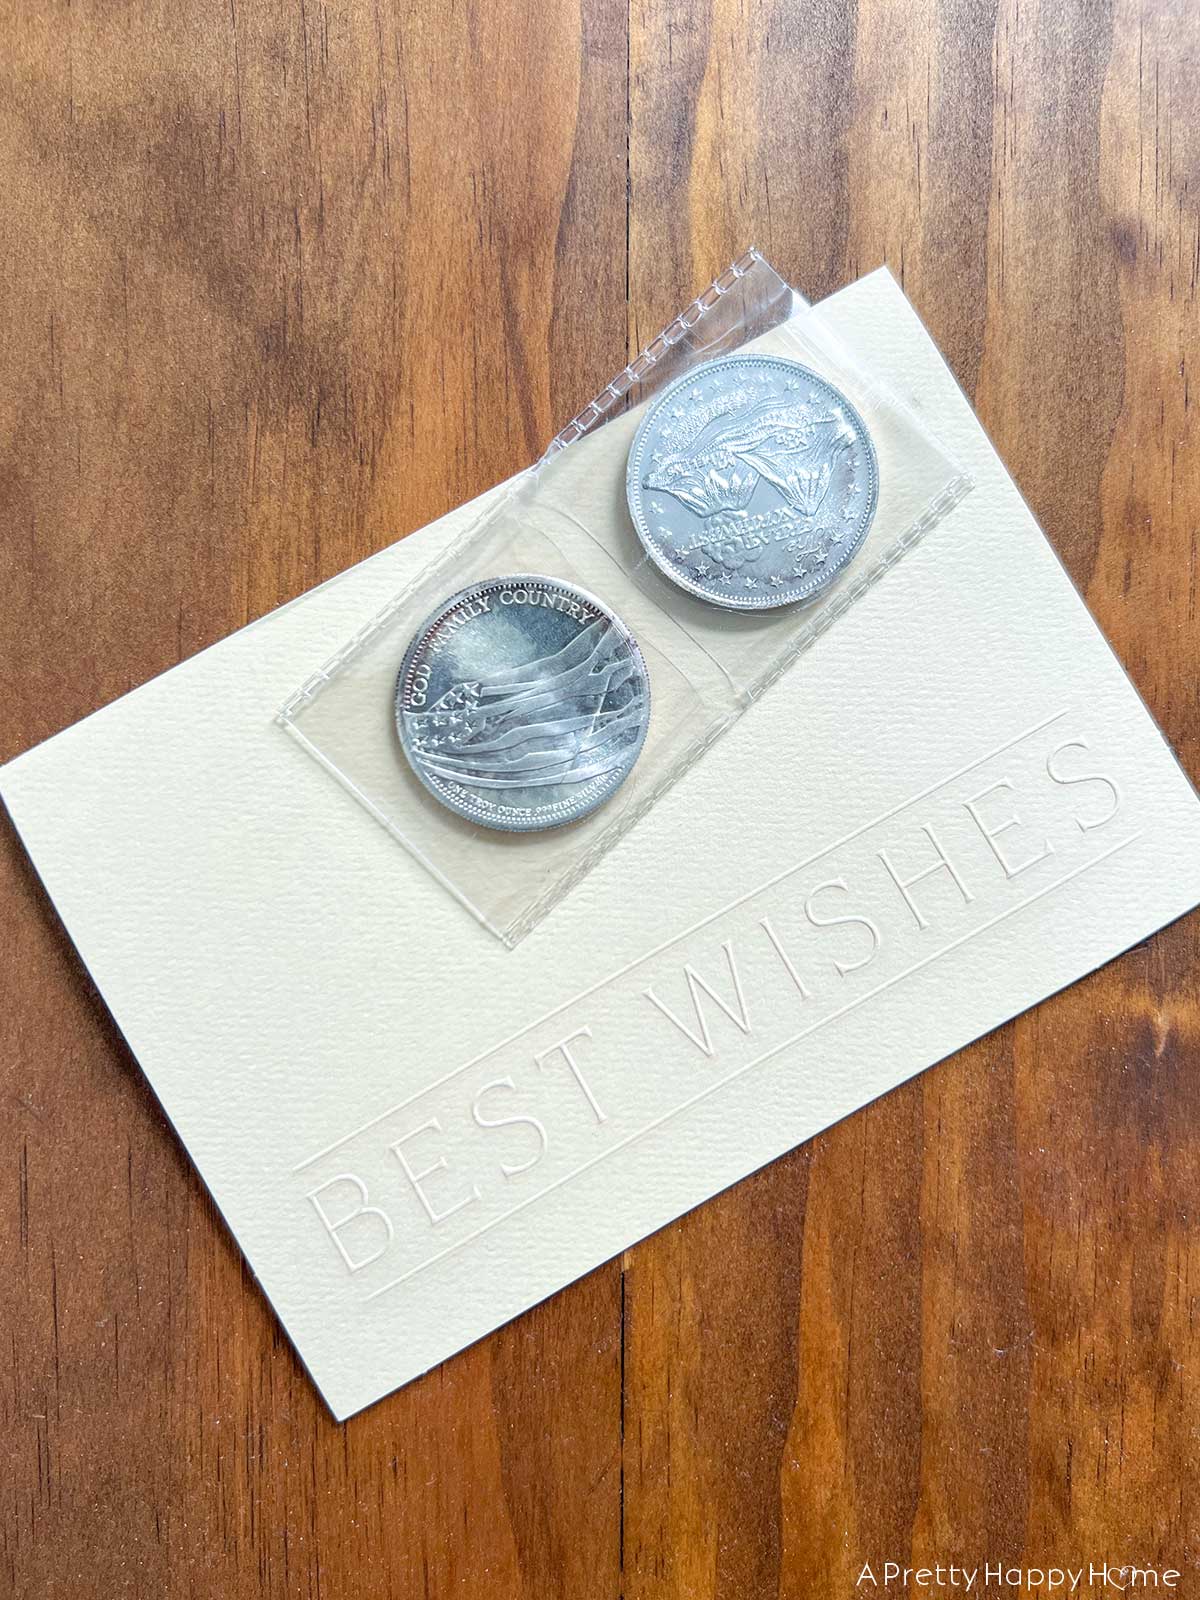 10 Wedding Gifts We Still Use 25 Years Later silver coins wedding gifts you actually use